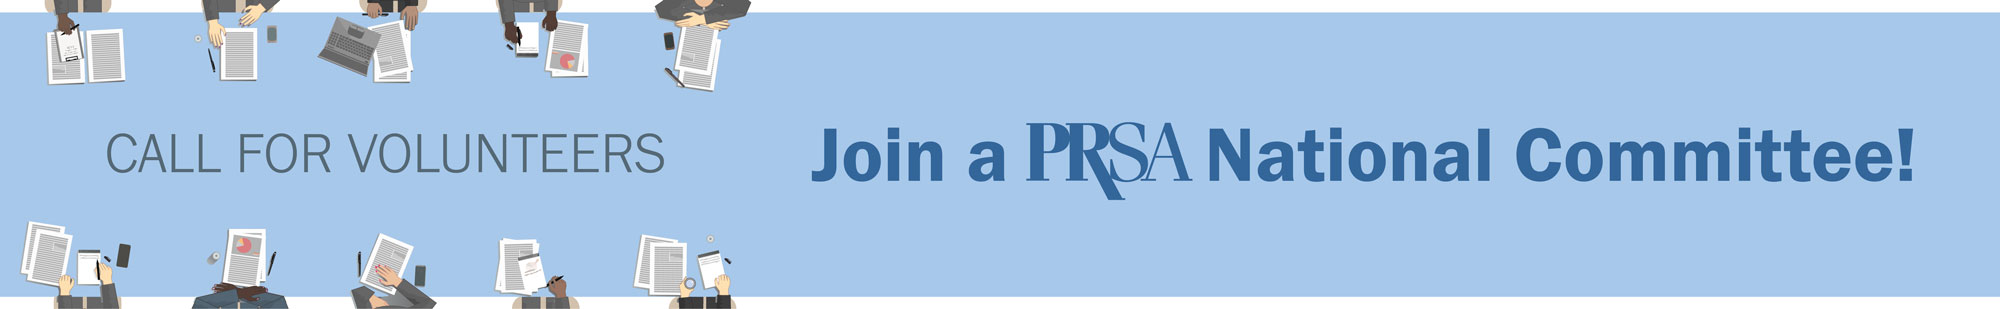 Join a PRSA National Committee